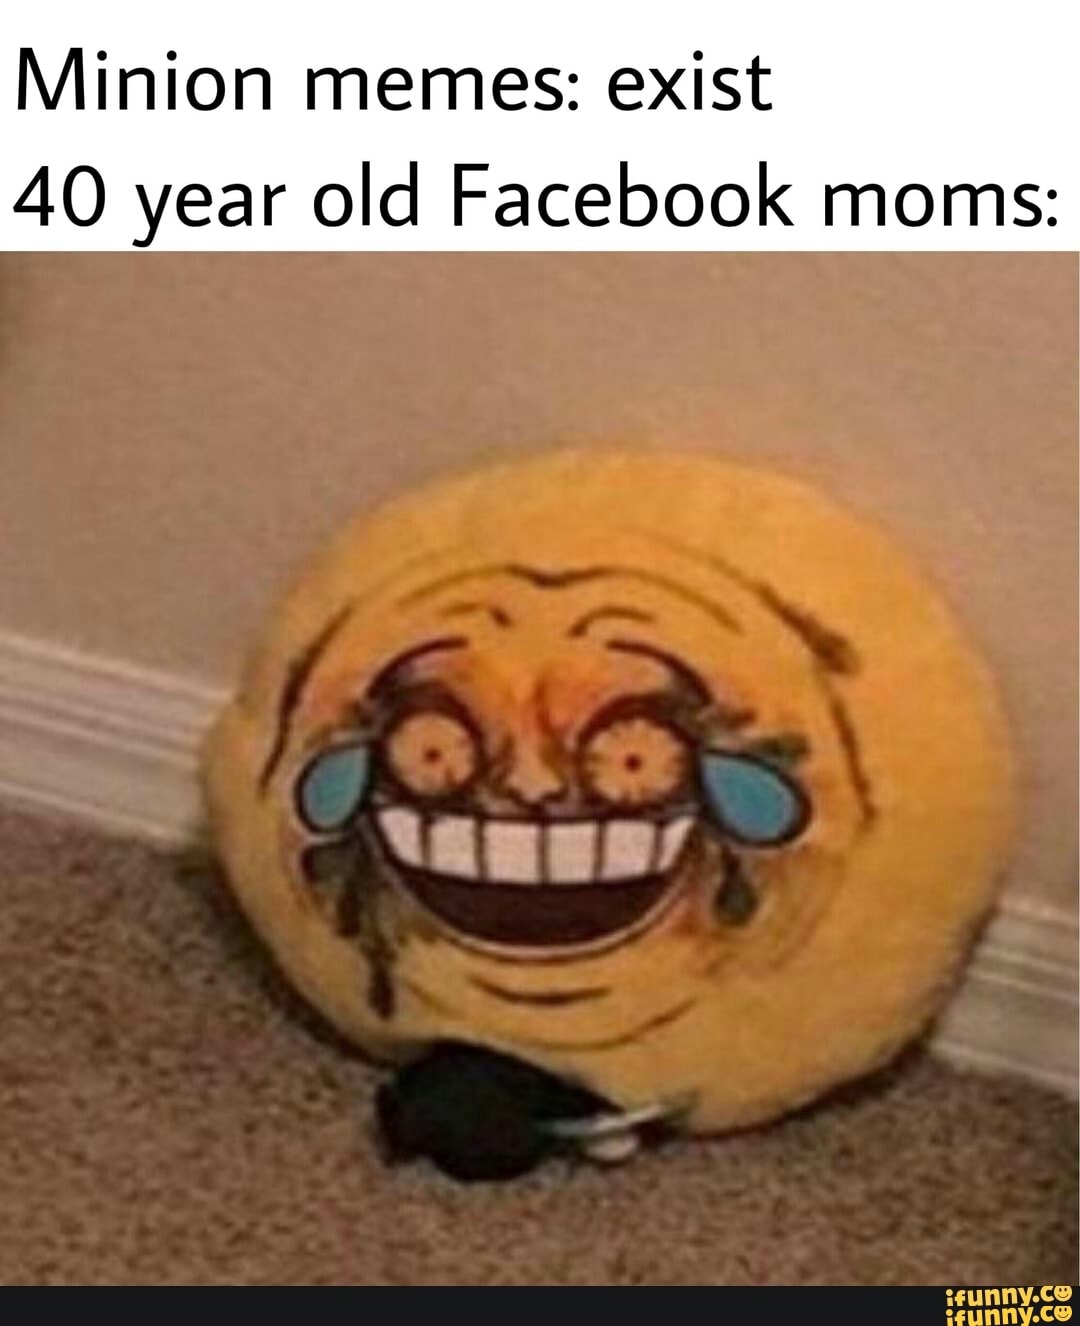 Minion memes: exist 40 year old Facebook moms.